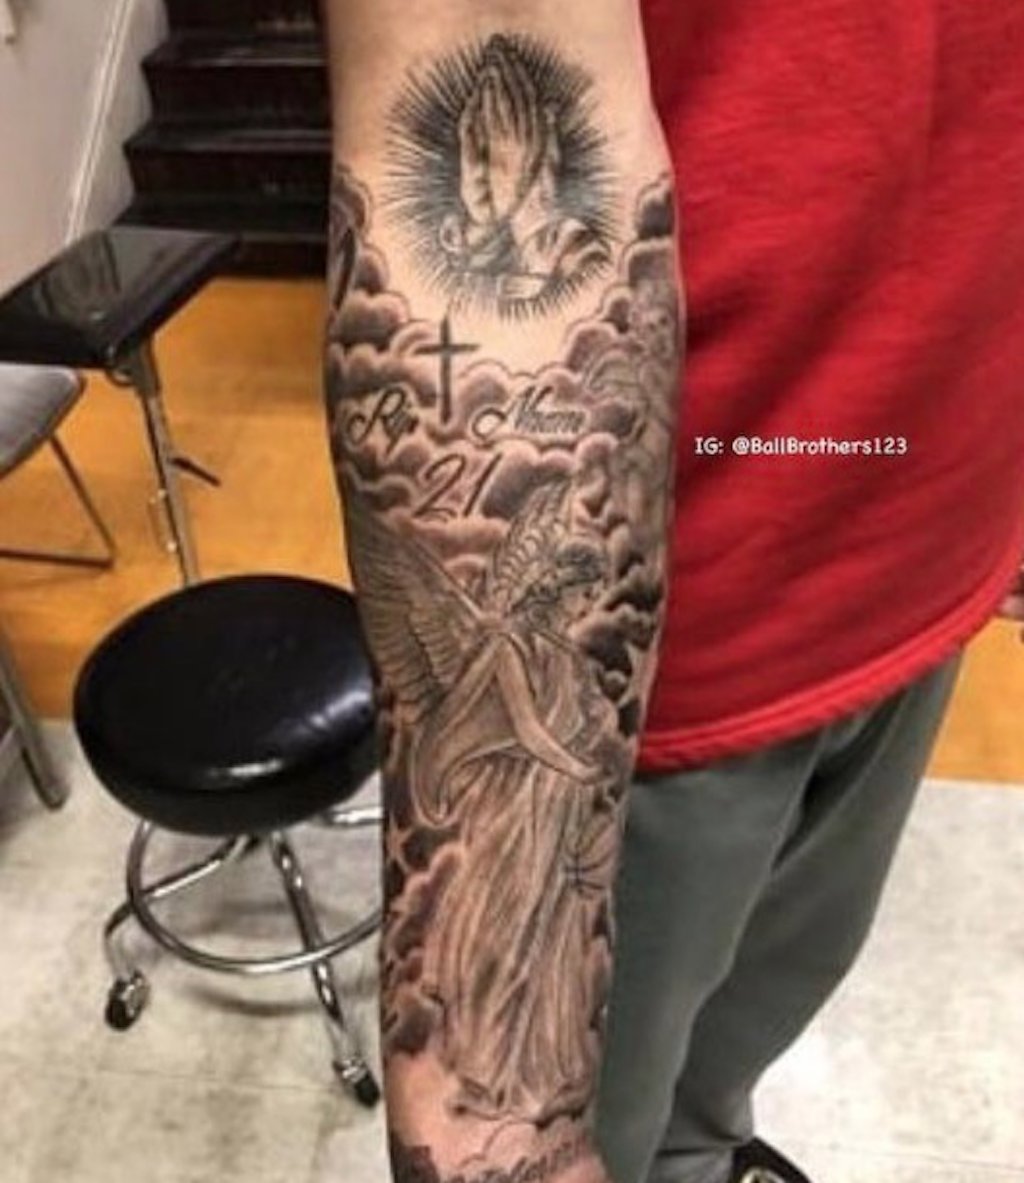 Lonzo Balls stunning new tattoo sleeve features US icons  Los Angeles  Times